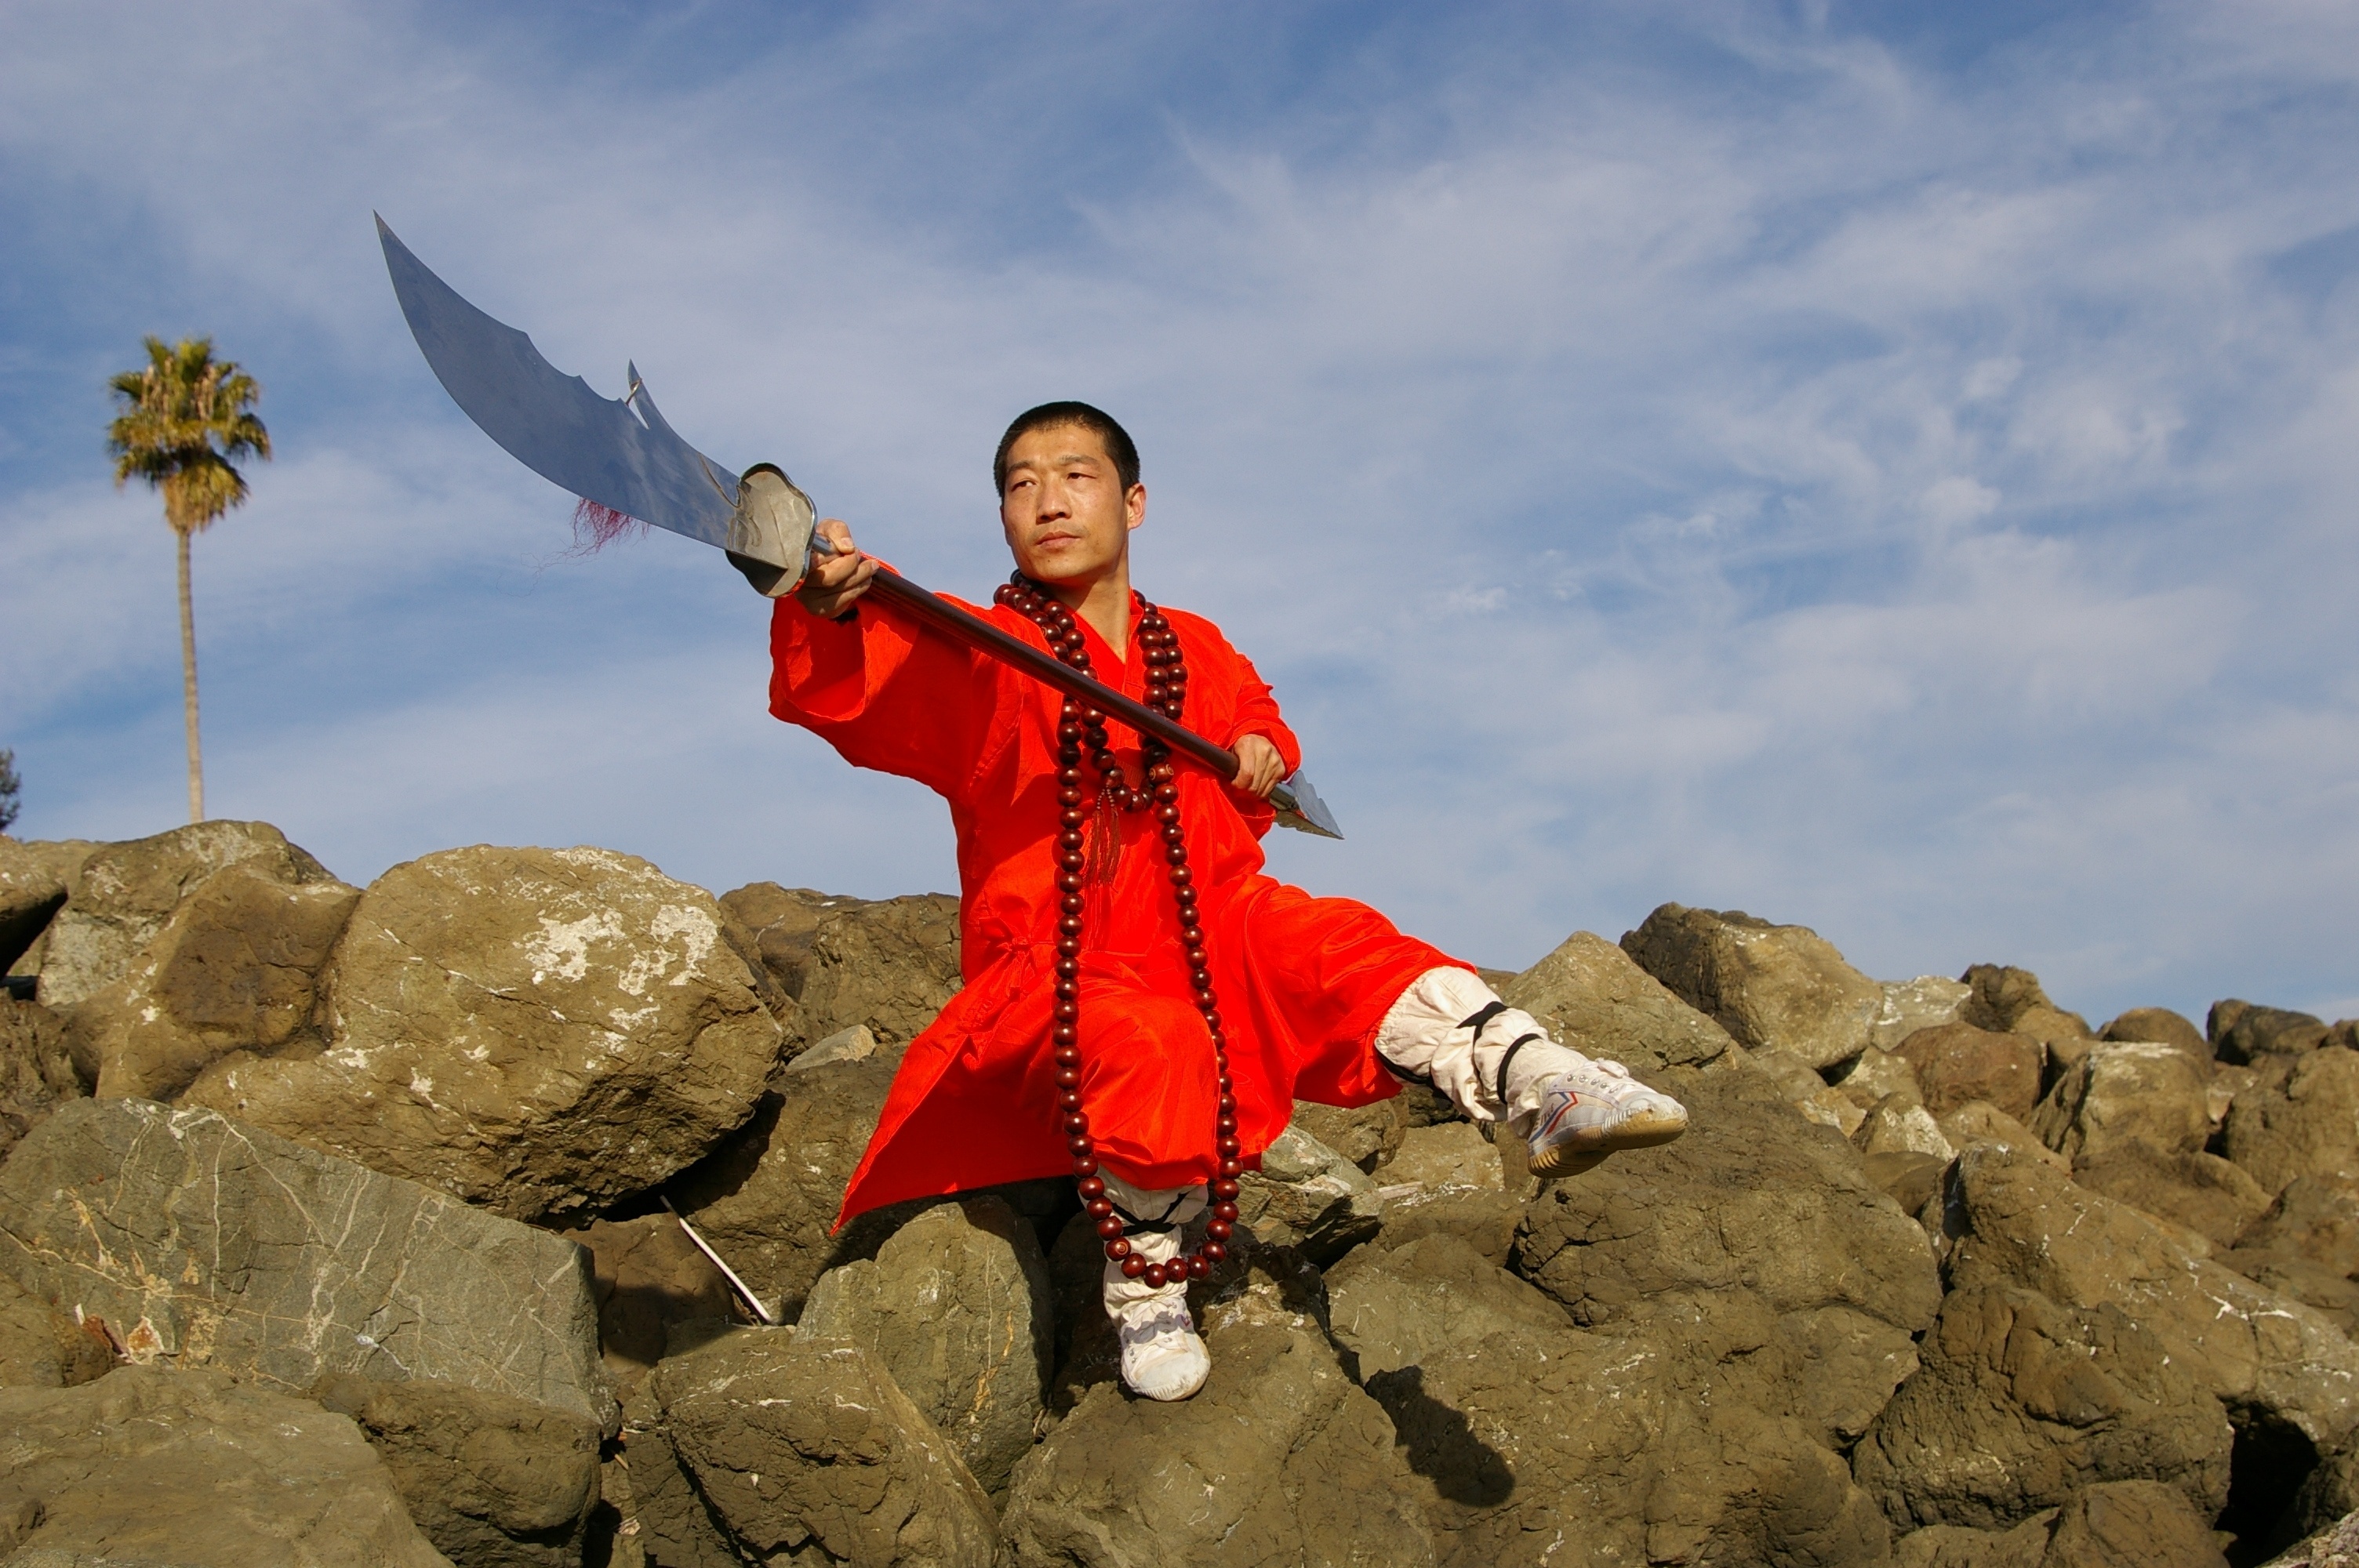 Shaolin Kung Fu: A combination of Chan philosophy and martial arts, Mediation and combat sports discipline. 3010x2000 HD Wallpaper.